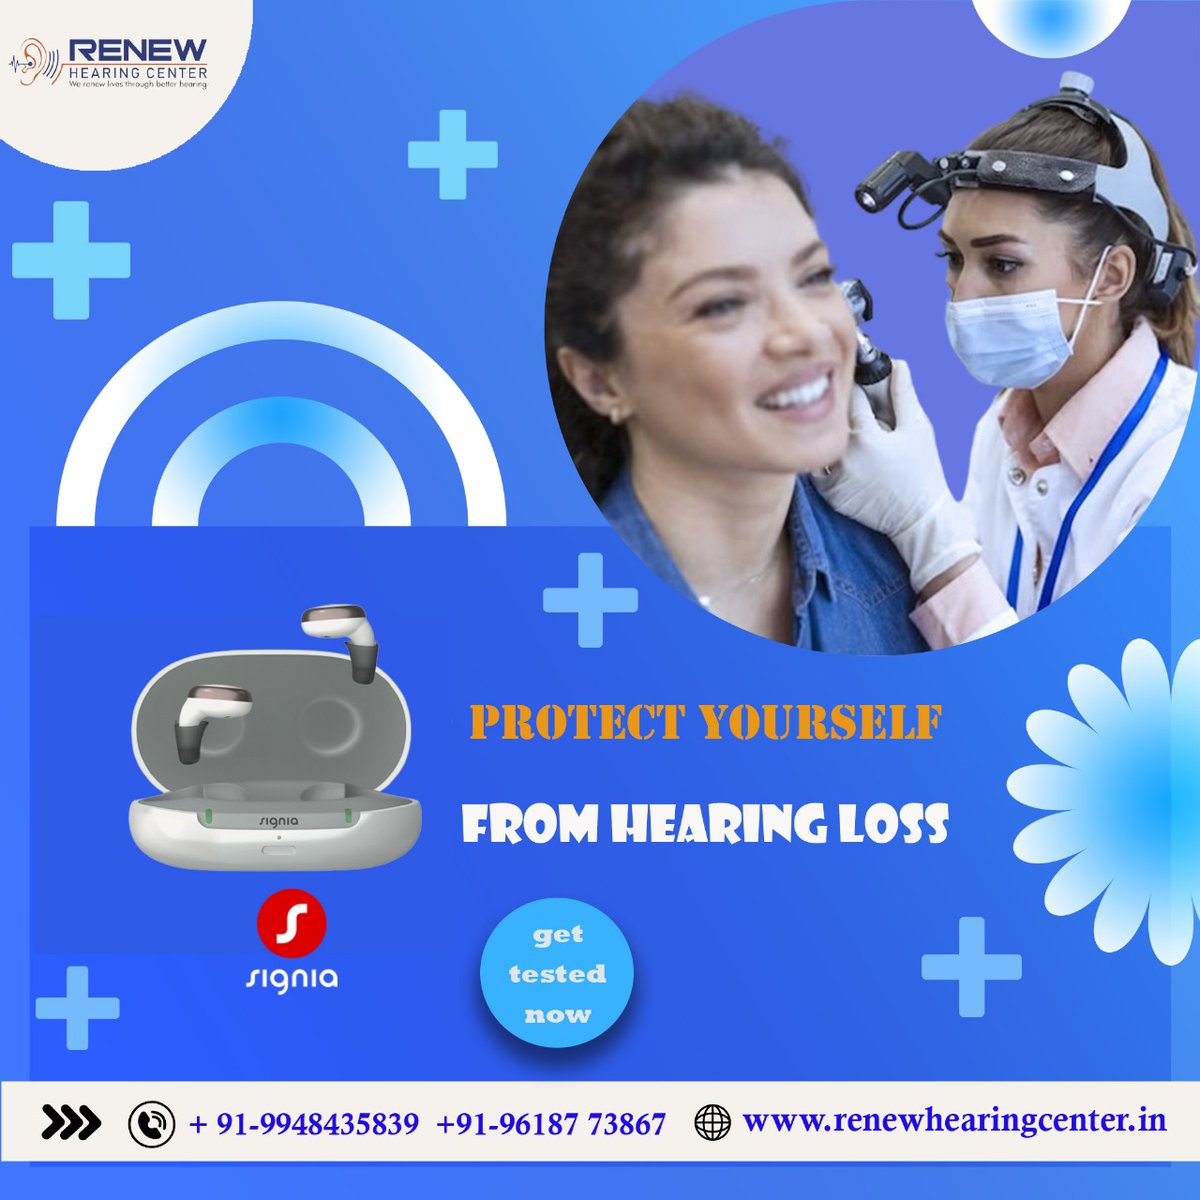 👂 Struggling with hearing issues? 🗣️ Overcoming speech problems? 🧠 Seeking psychological support? RENEW HEARING CENTER is here for you.

Call us at +91-9948435839 for expert care. #HearingCare #speechdisorders #mentalwellness